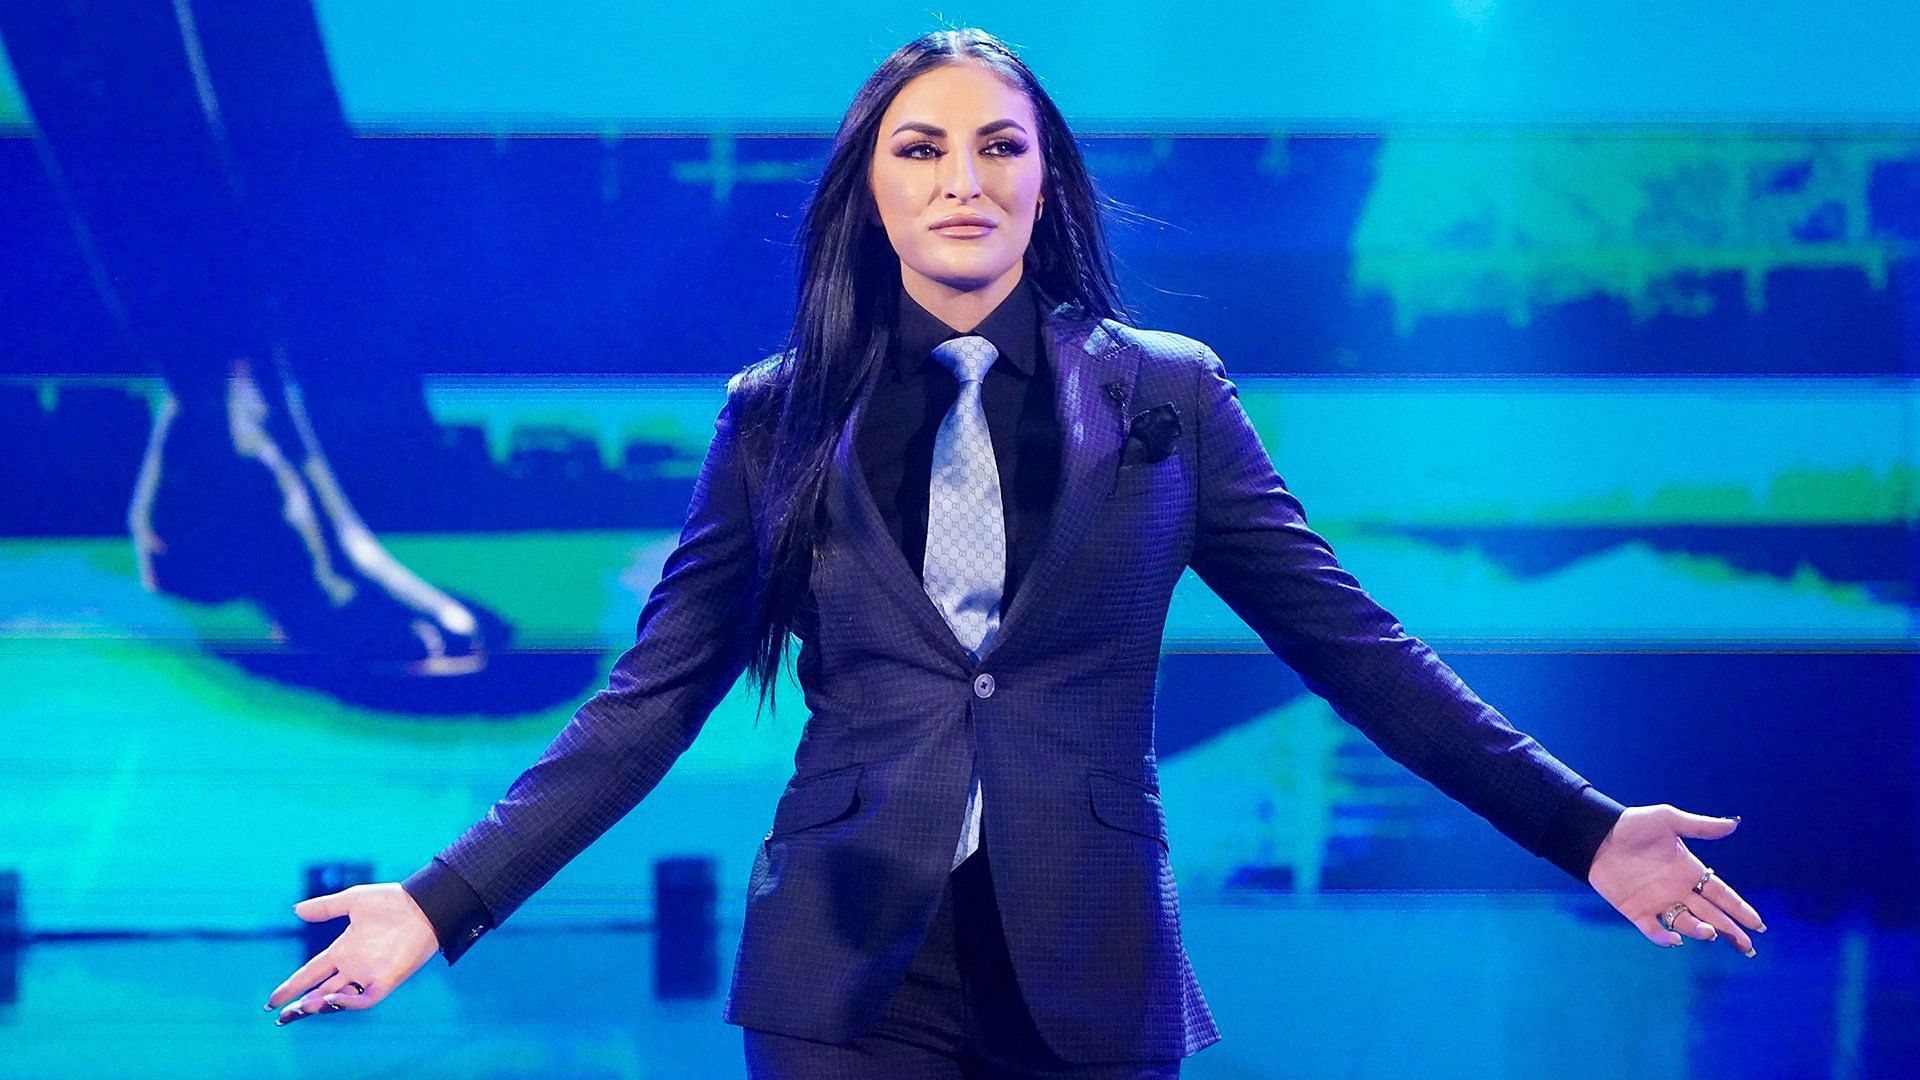 Sonya Deville came out about her sexuality in 2015